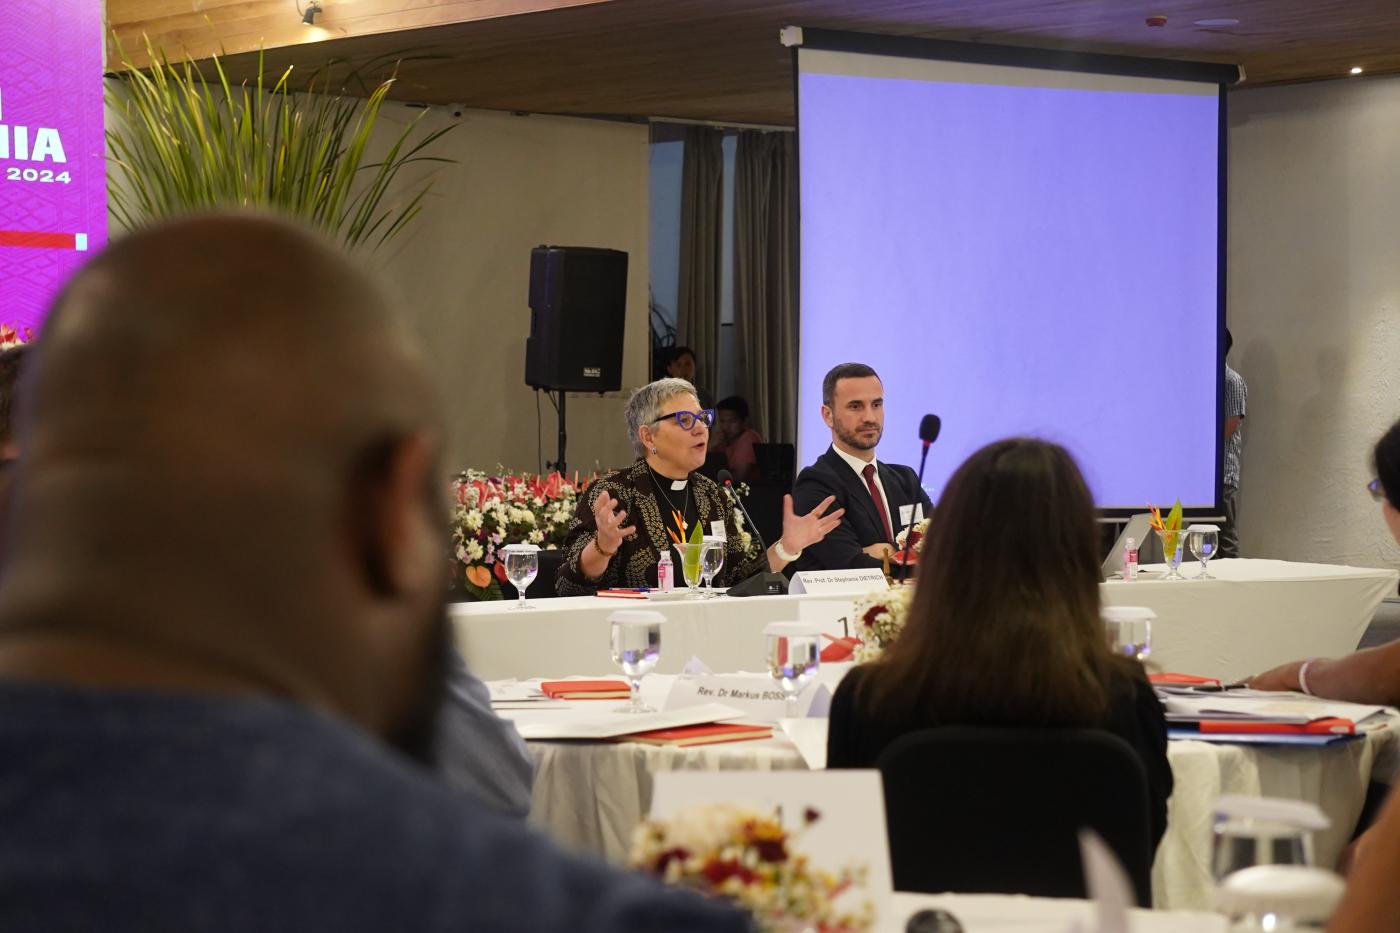 Rev. Prof. Dr Stephanie Dietrich, WCC Faith and Order moderator, during the opening session of the commission`s meeting in Indonesia, 2 February 2024, Photo: Dalton Darwin/WCC